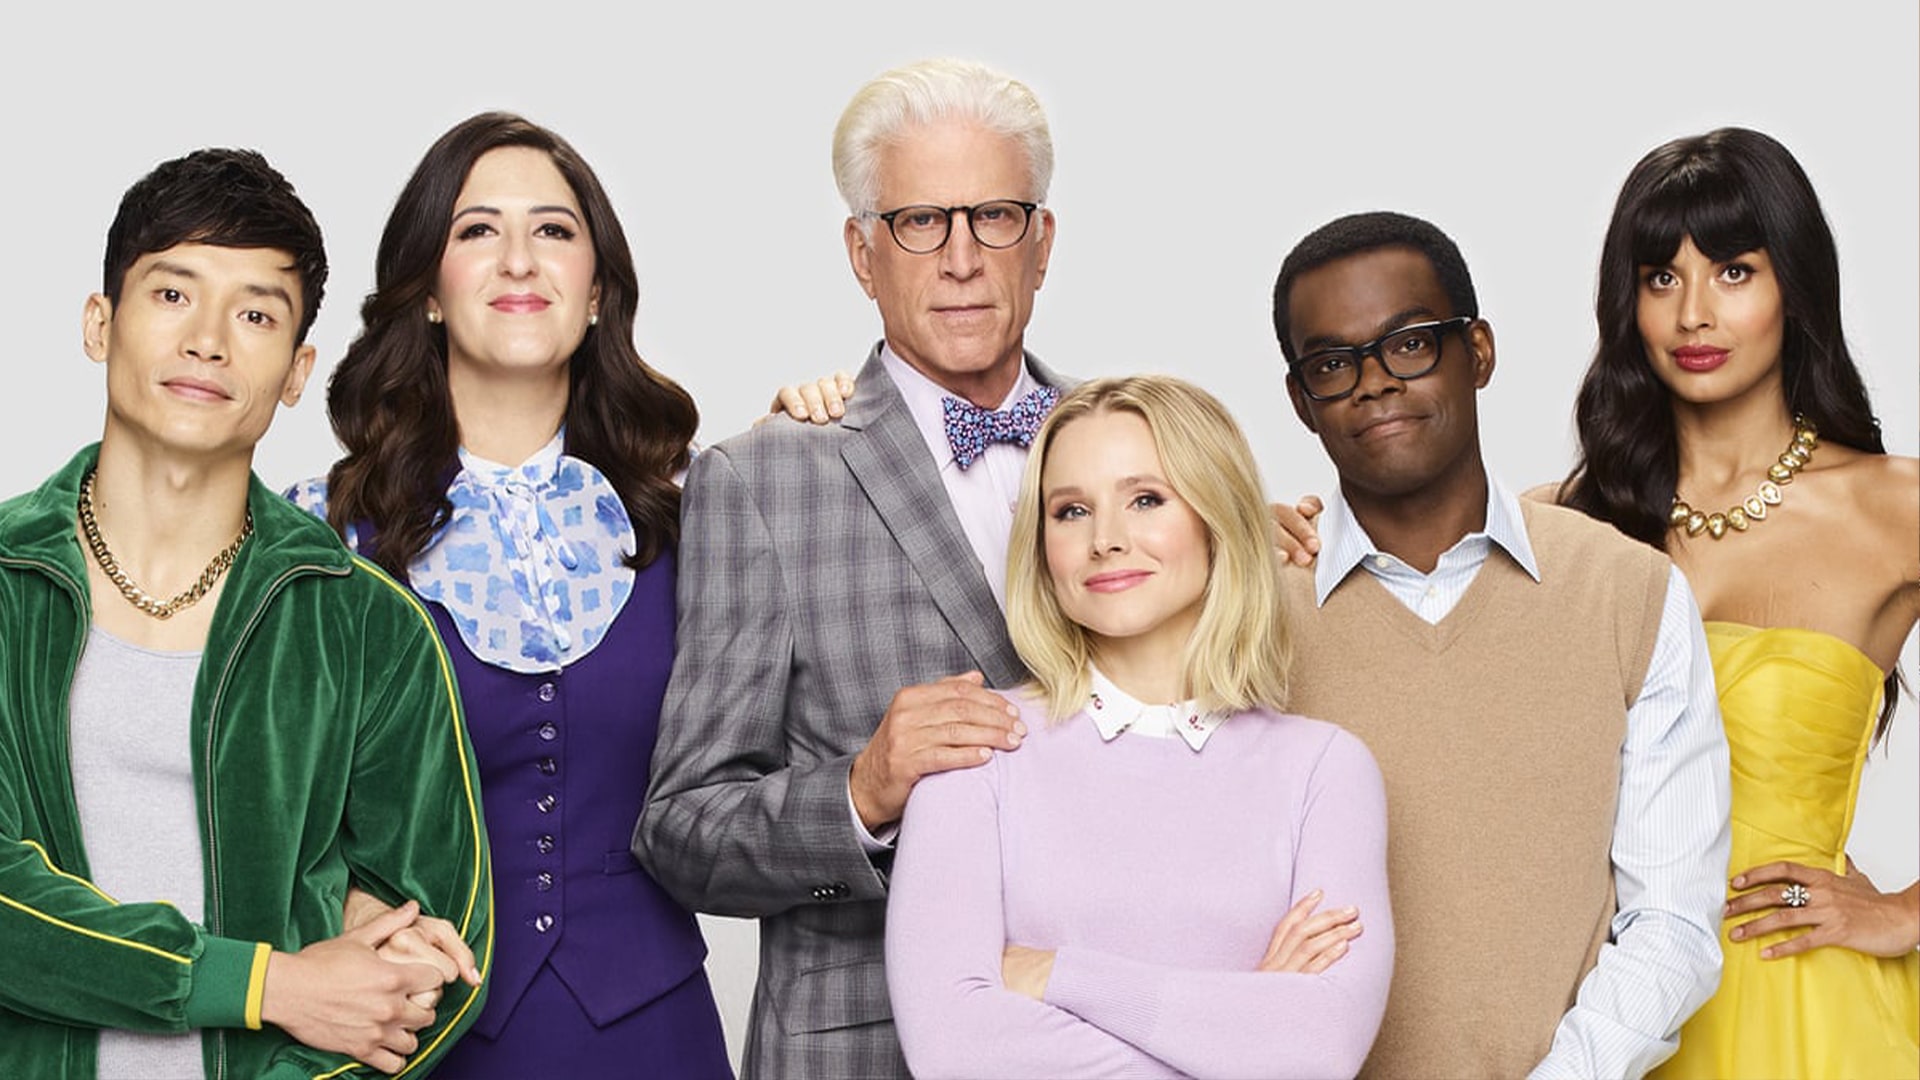 Who Said These 30 The Good Place Quotes Quiz - The Good Place Quotes Quiz